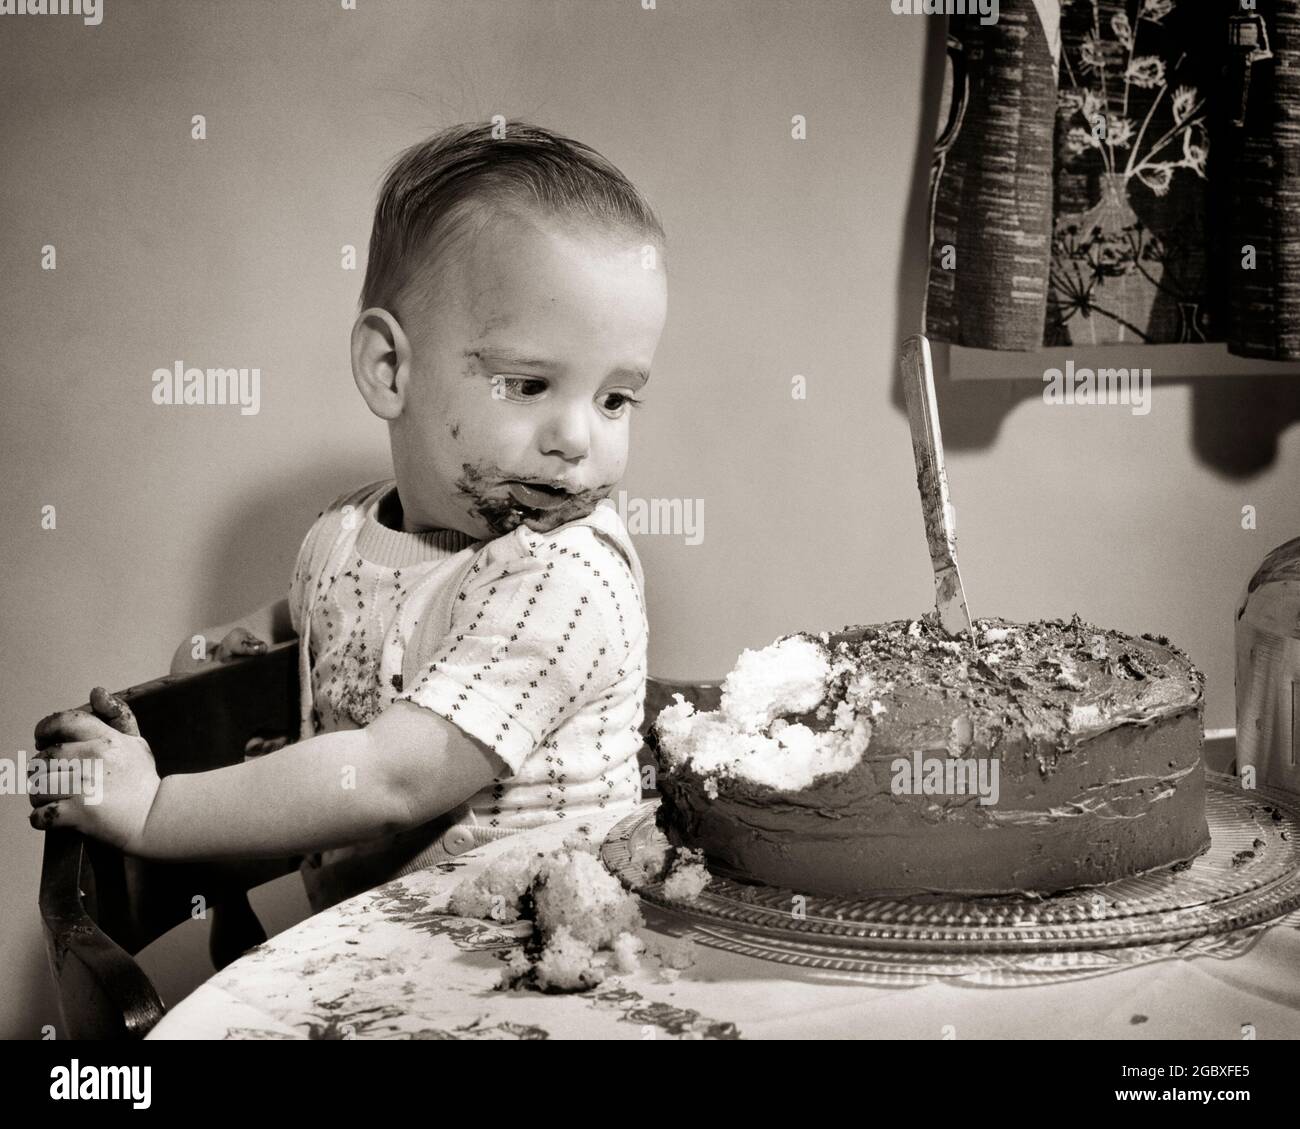 1950s GUILTY LITTLE BOY LOOKING AT PARTIALLY EATEN WHOLE LAYER CAKE CHOCOLATE ICING ALL OVER HANDS AND FACE  - b2082 JHN001 HARS CAKES HOME LIFE COPY SPACE HALF-LENGTH MALES ALL ICING B&W HUMOROUS HIGH ANGLE MISCHIEF AND EXCITEMENT LAYER COMICAL FROSTING AT COMEDY WHOLE BABY BOY EATEN GROWTH GUILTY JUVENILES MISBEHAVING PARTIALLY BLACK AND WHITE CAUCASIAN ETHNICITY MISBEHAVIOR OLD FASHIONED Stock Photo